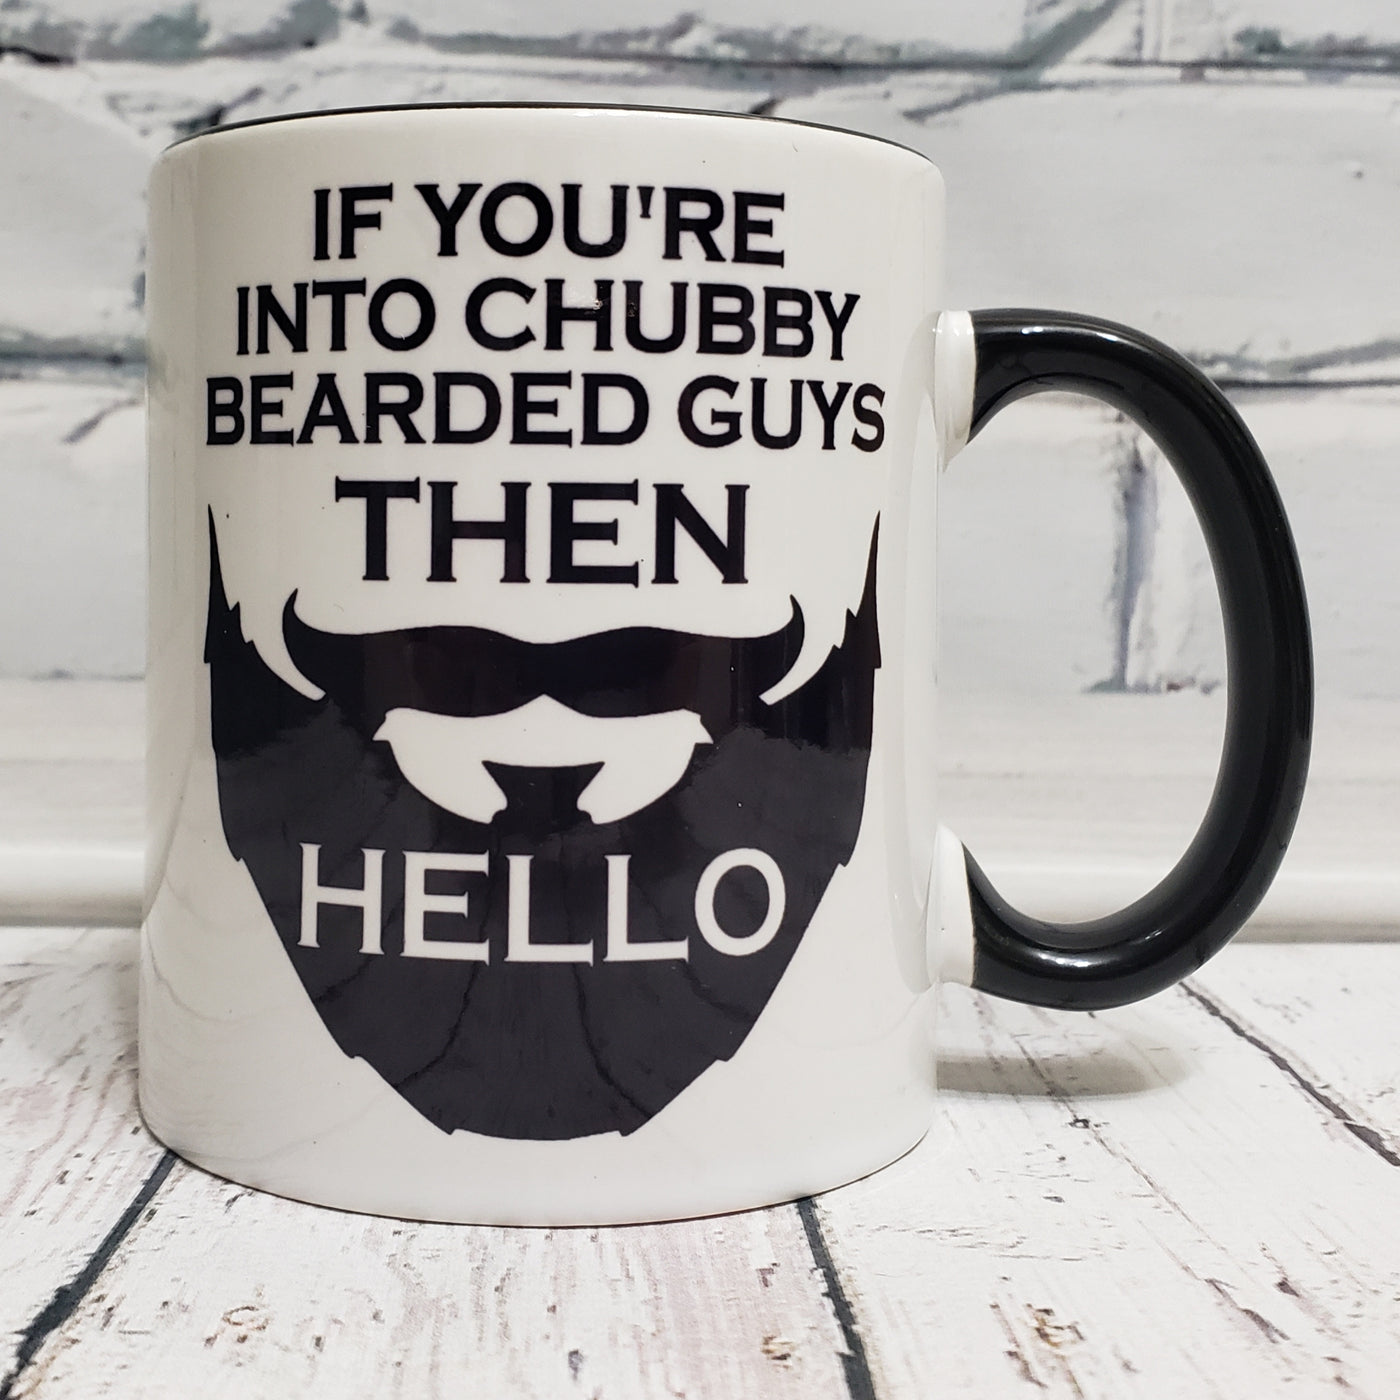 If You're Into Chubby Bearded Guys then Hello.